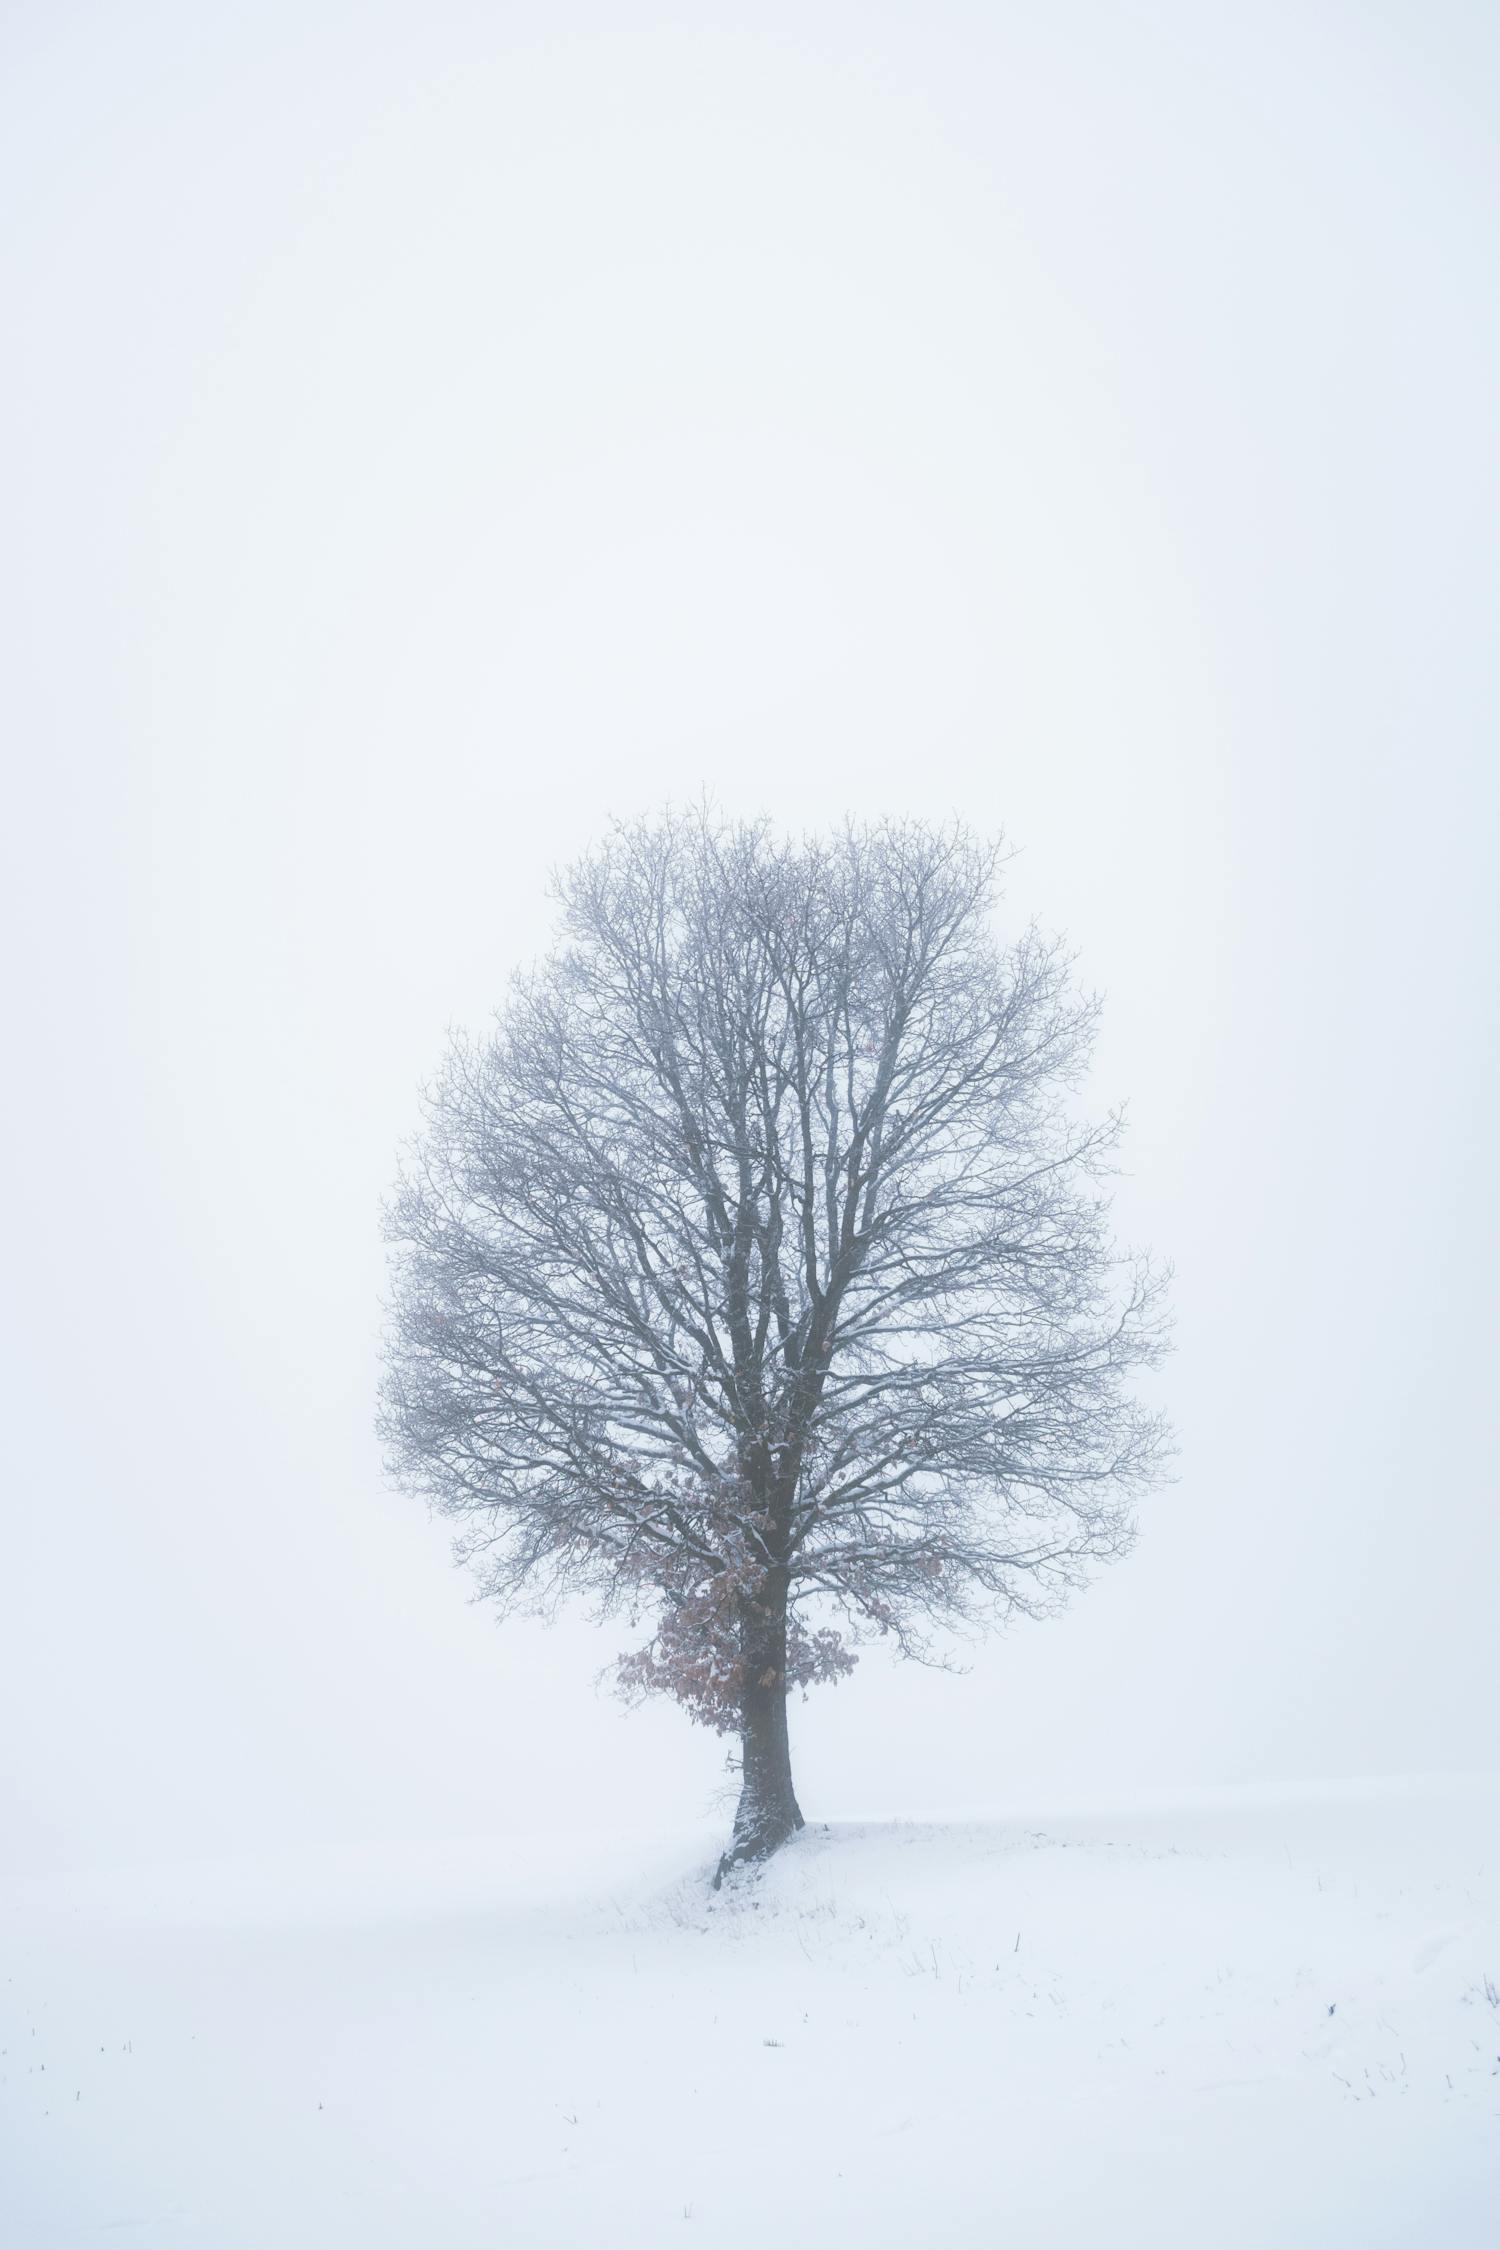 Leafless Tree On Snow Covered Ground · Free Stock Photo